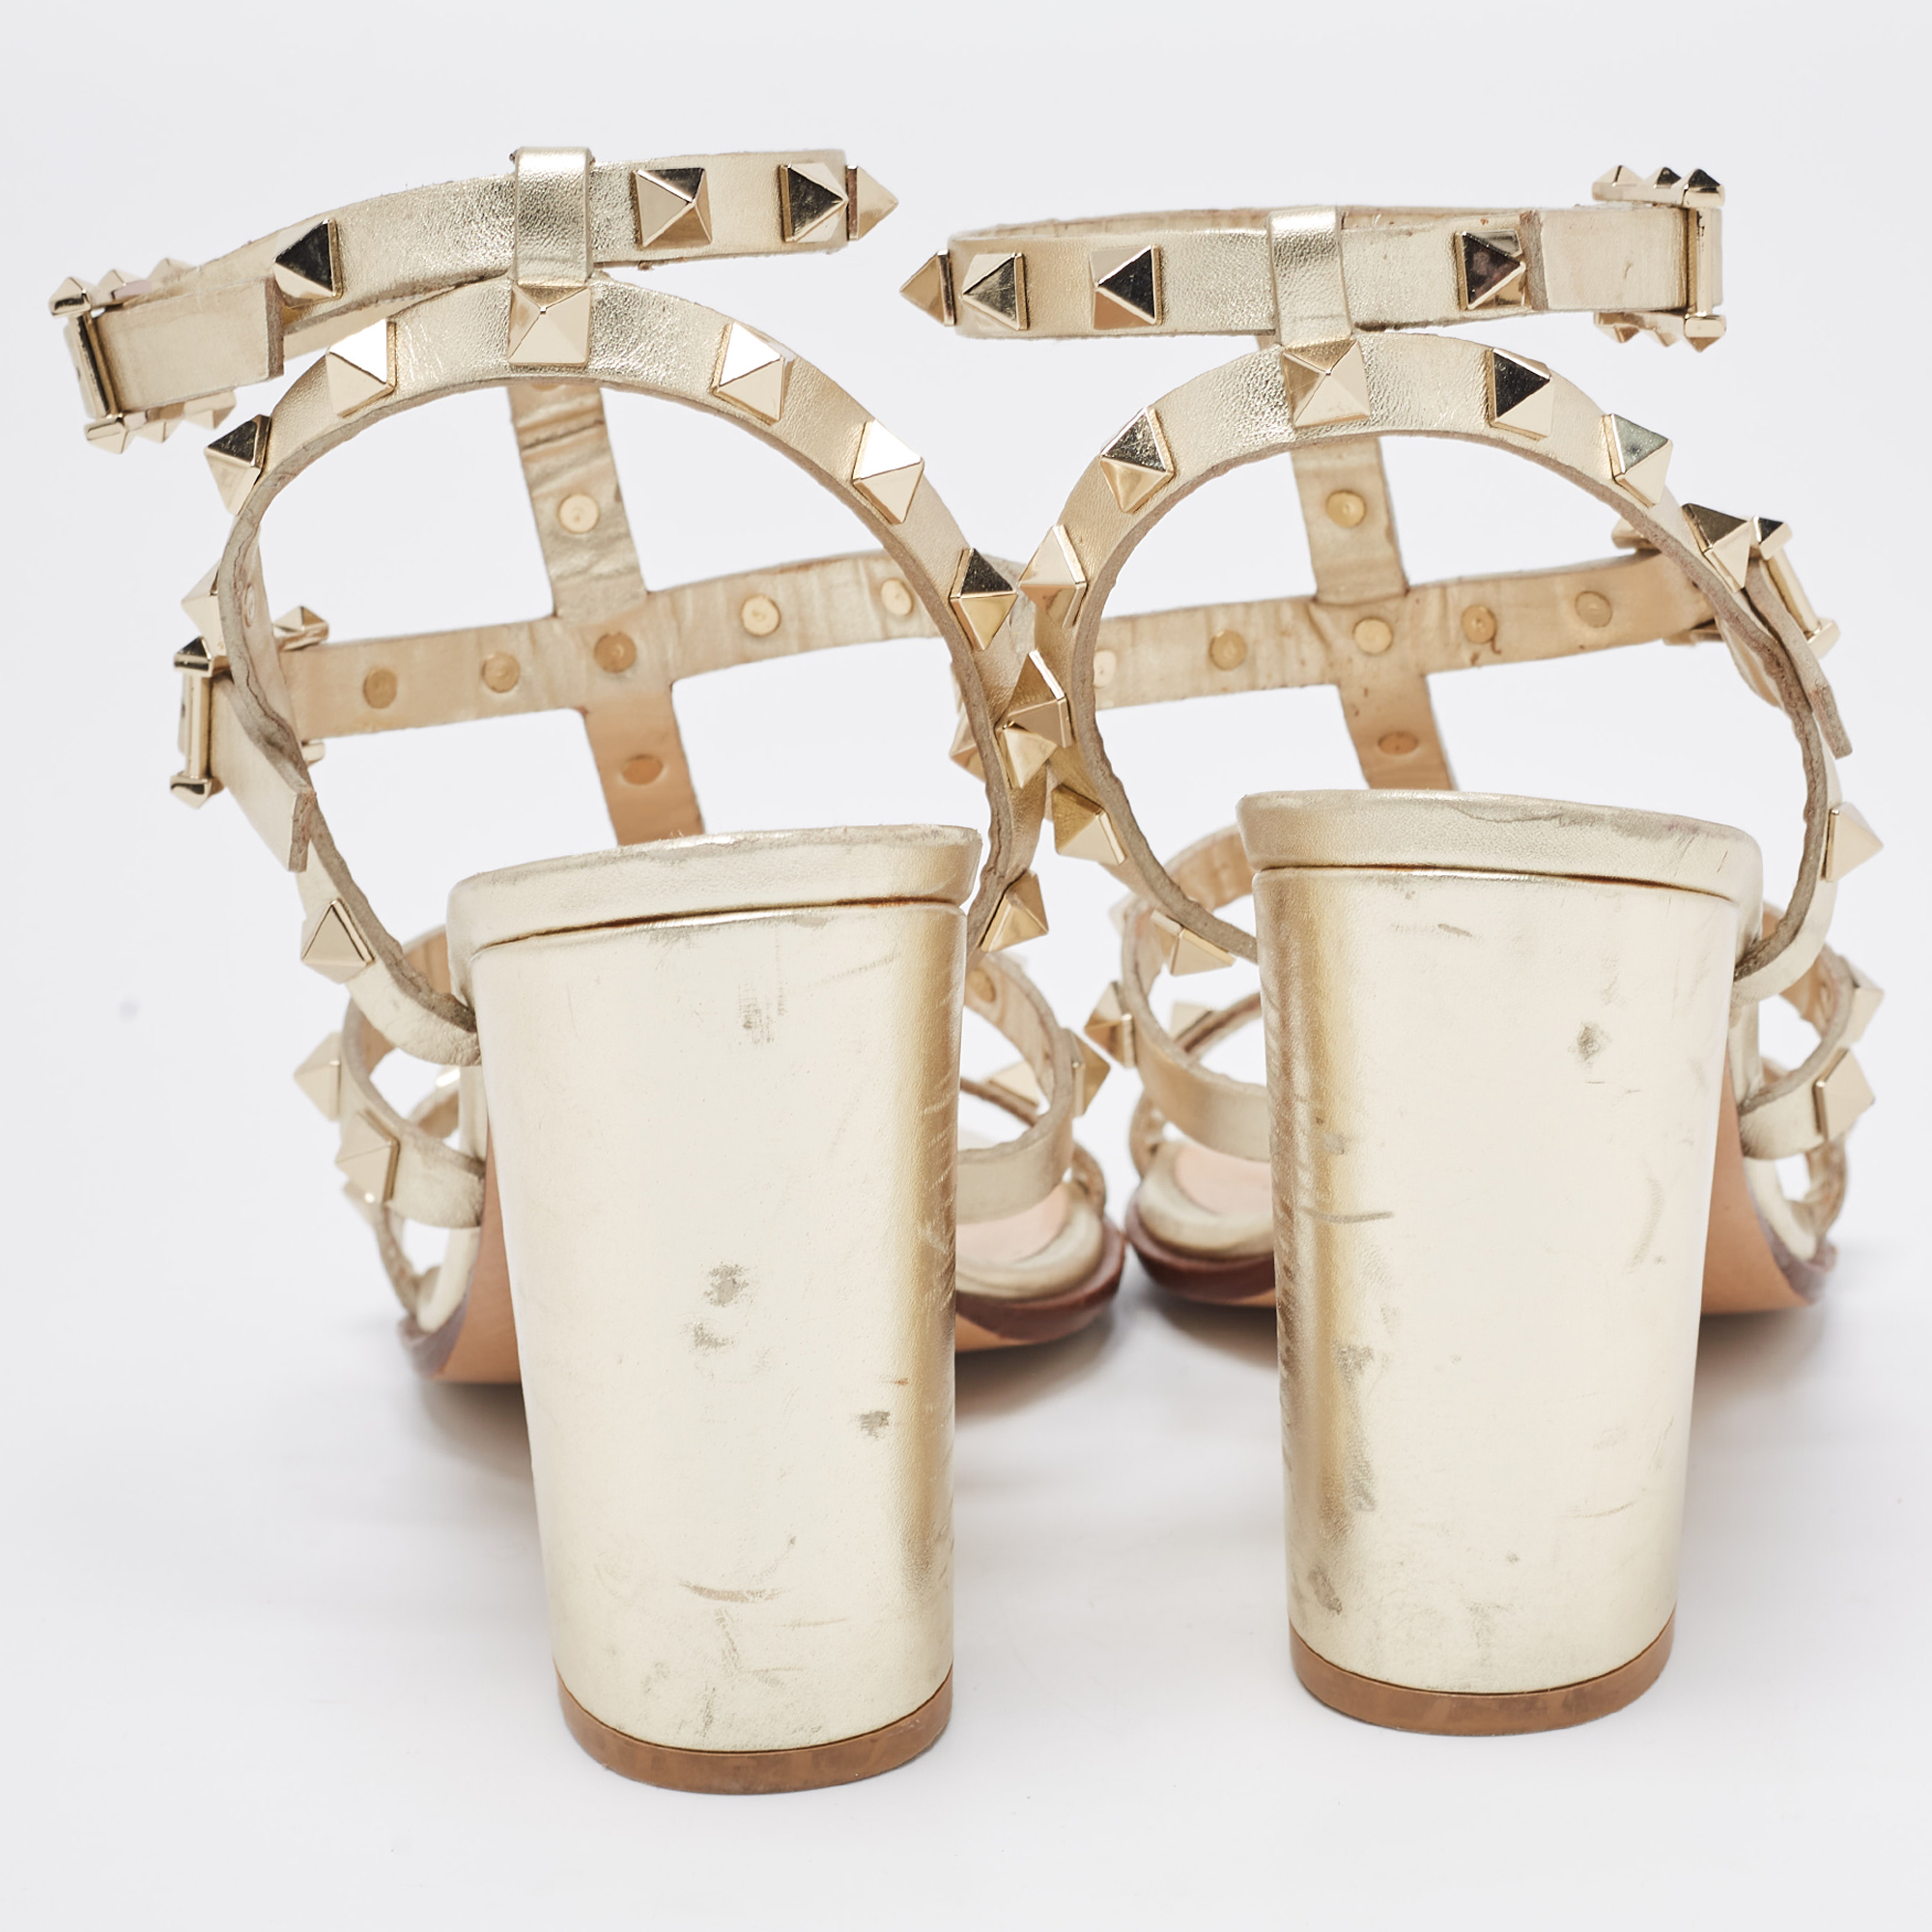 Valentino Gold Leather Rockstud Ankle Strap Sandals Size 37